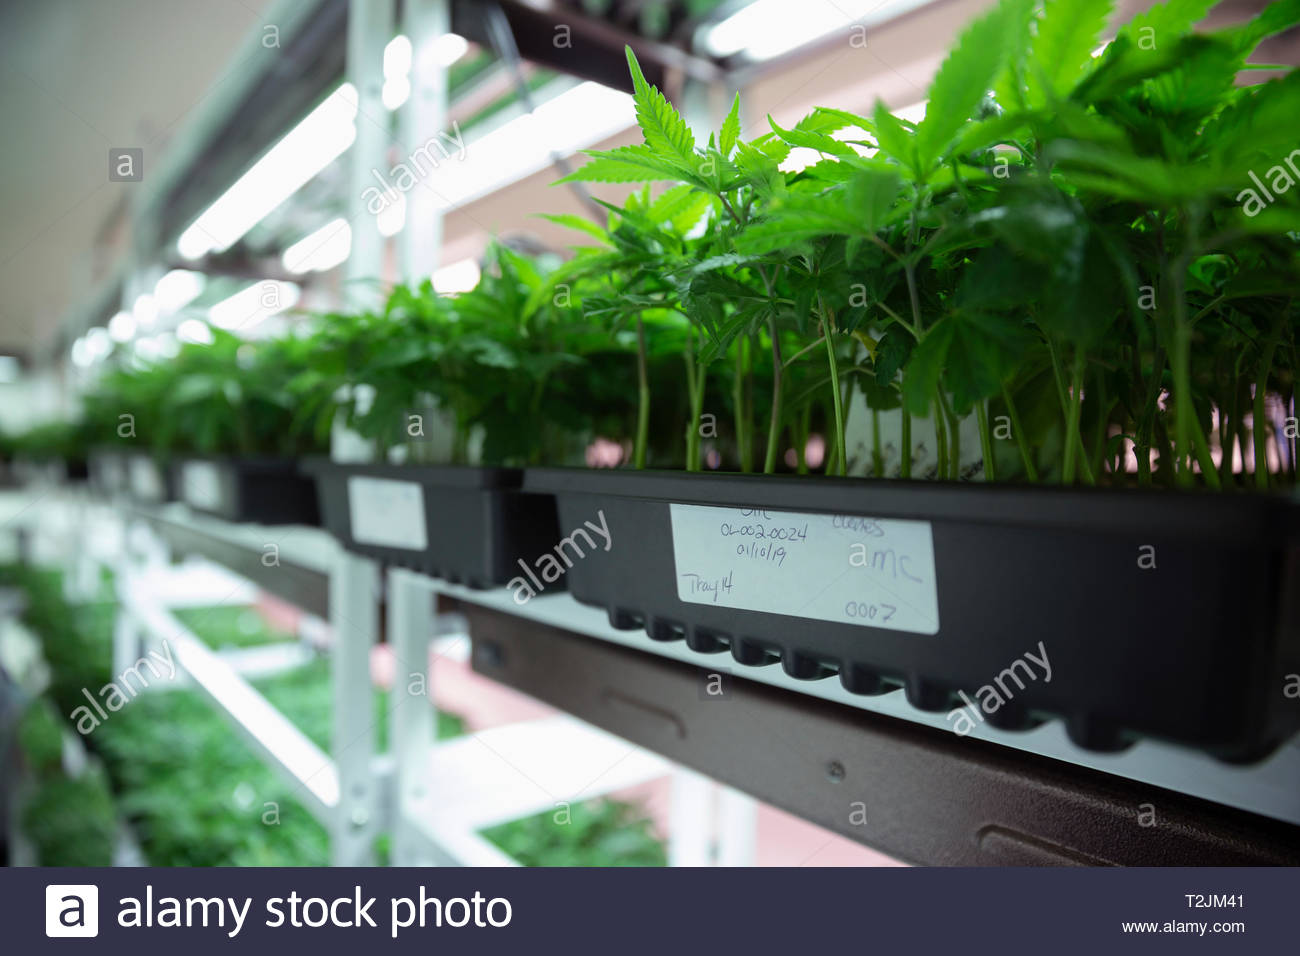 Cannabis seedlings in incubation Stock Photo